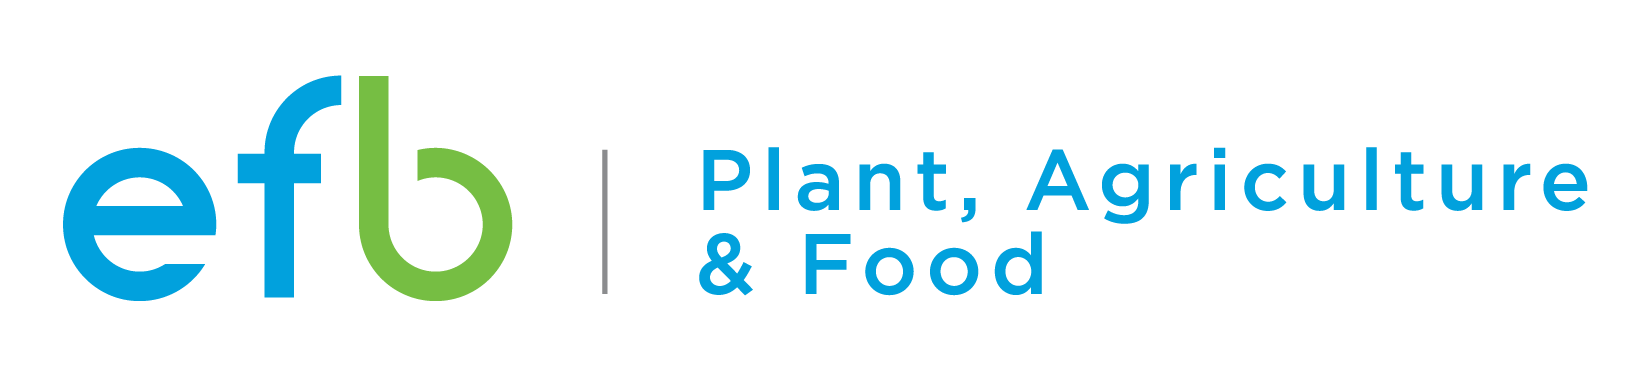 EFB Plant, Agriculture and Food Division